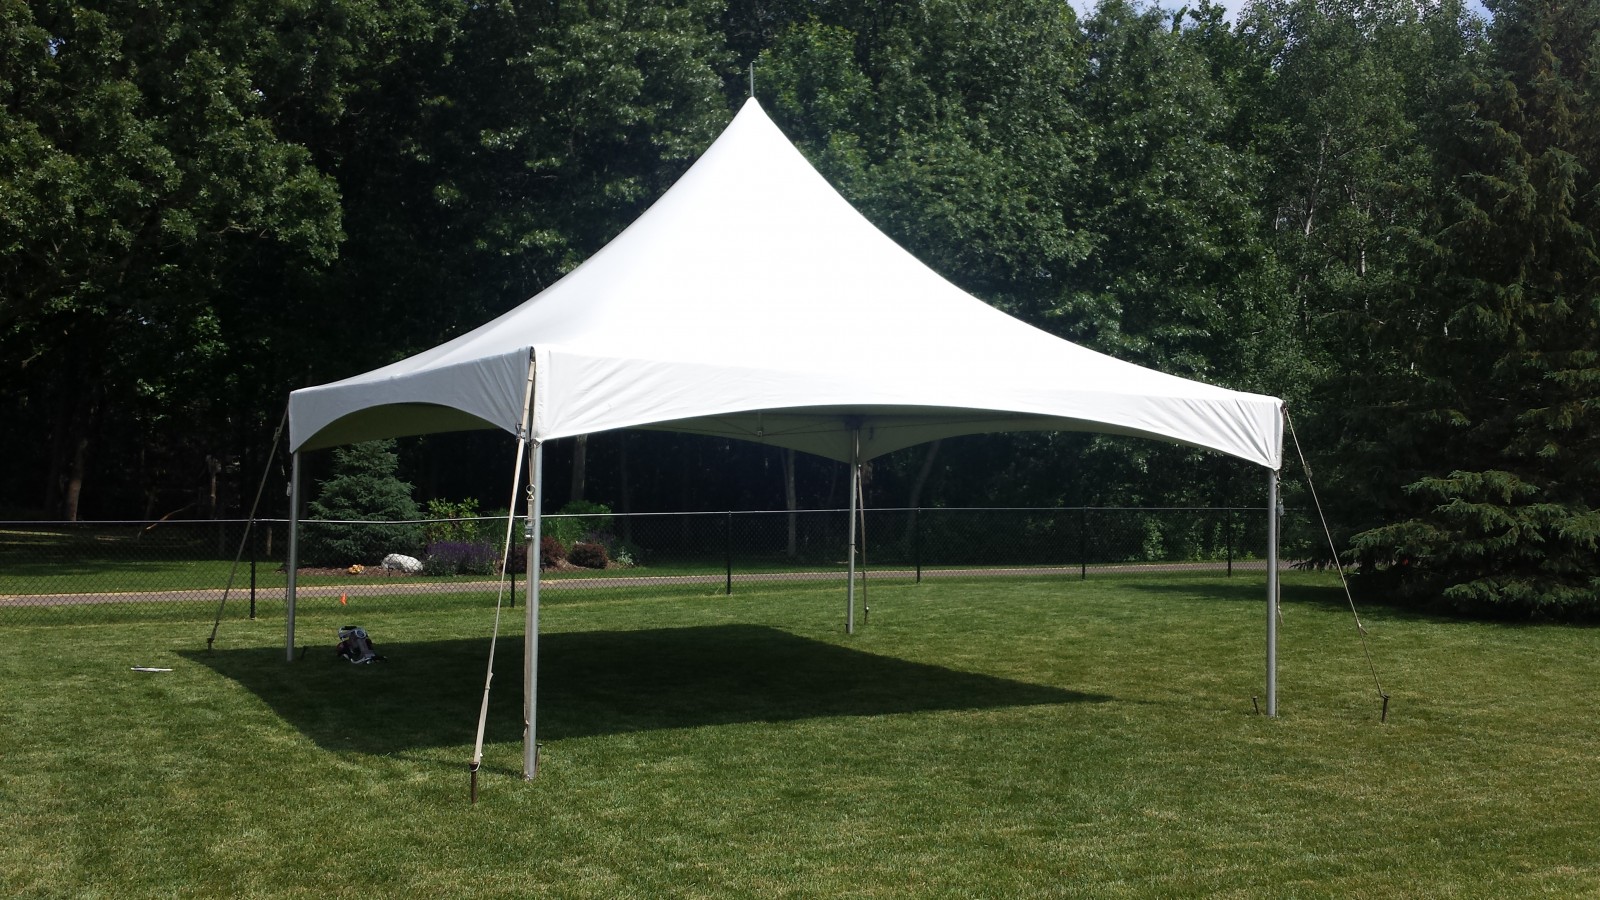 HIGHPEAK-STAKED Canopy 20x20 | Avery Rents Party Supplies Omaha and Bellevue